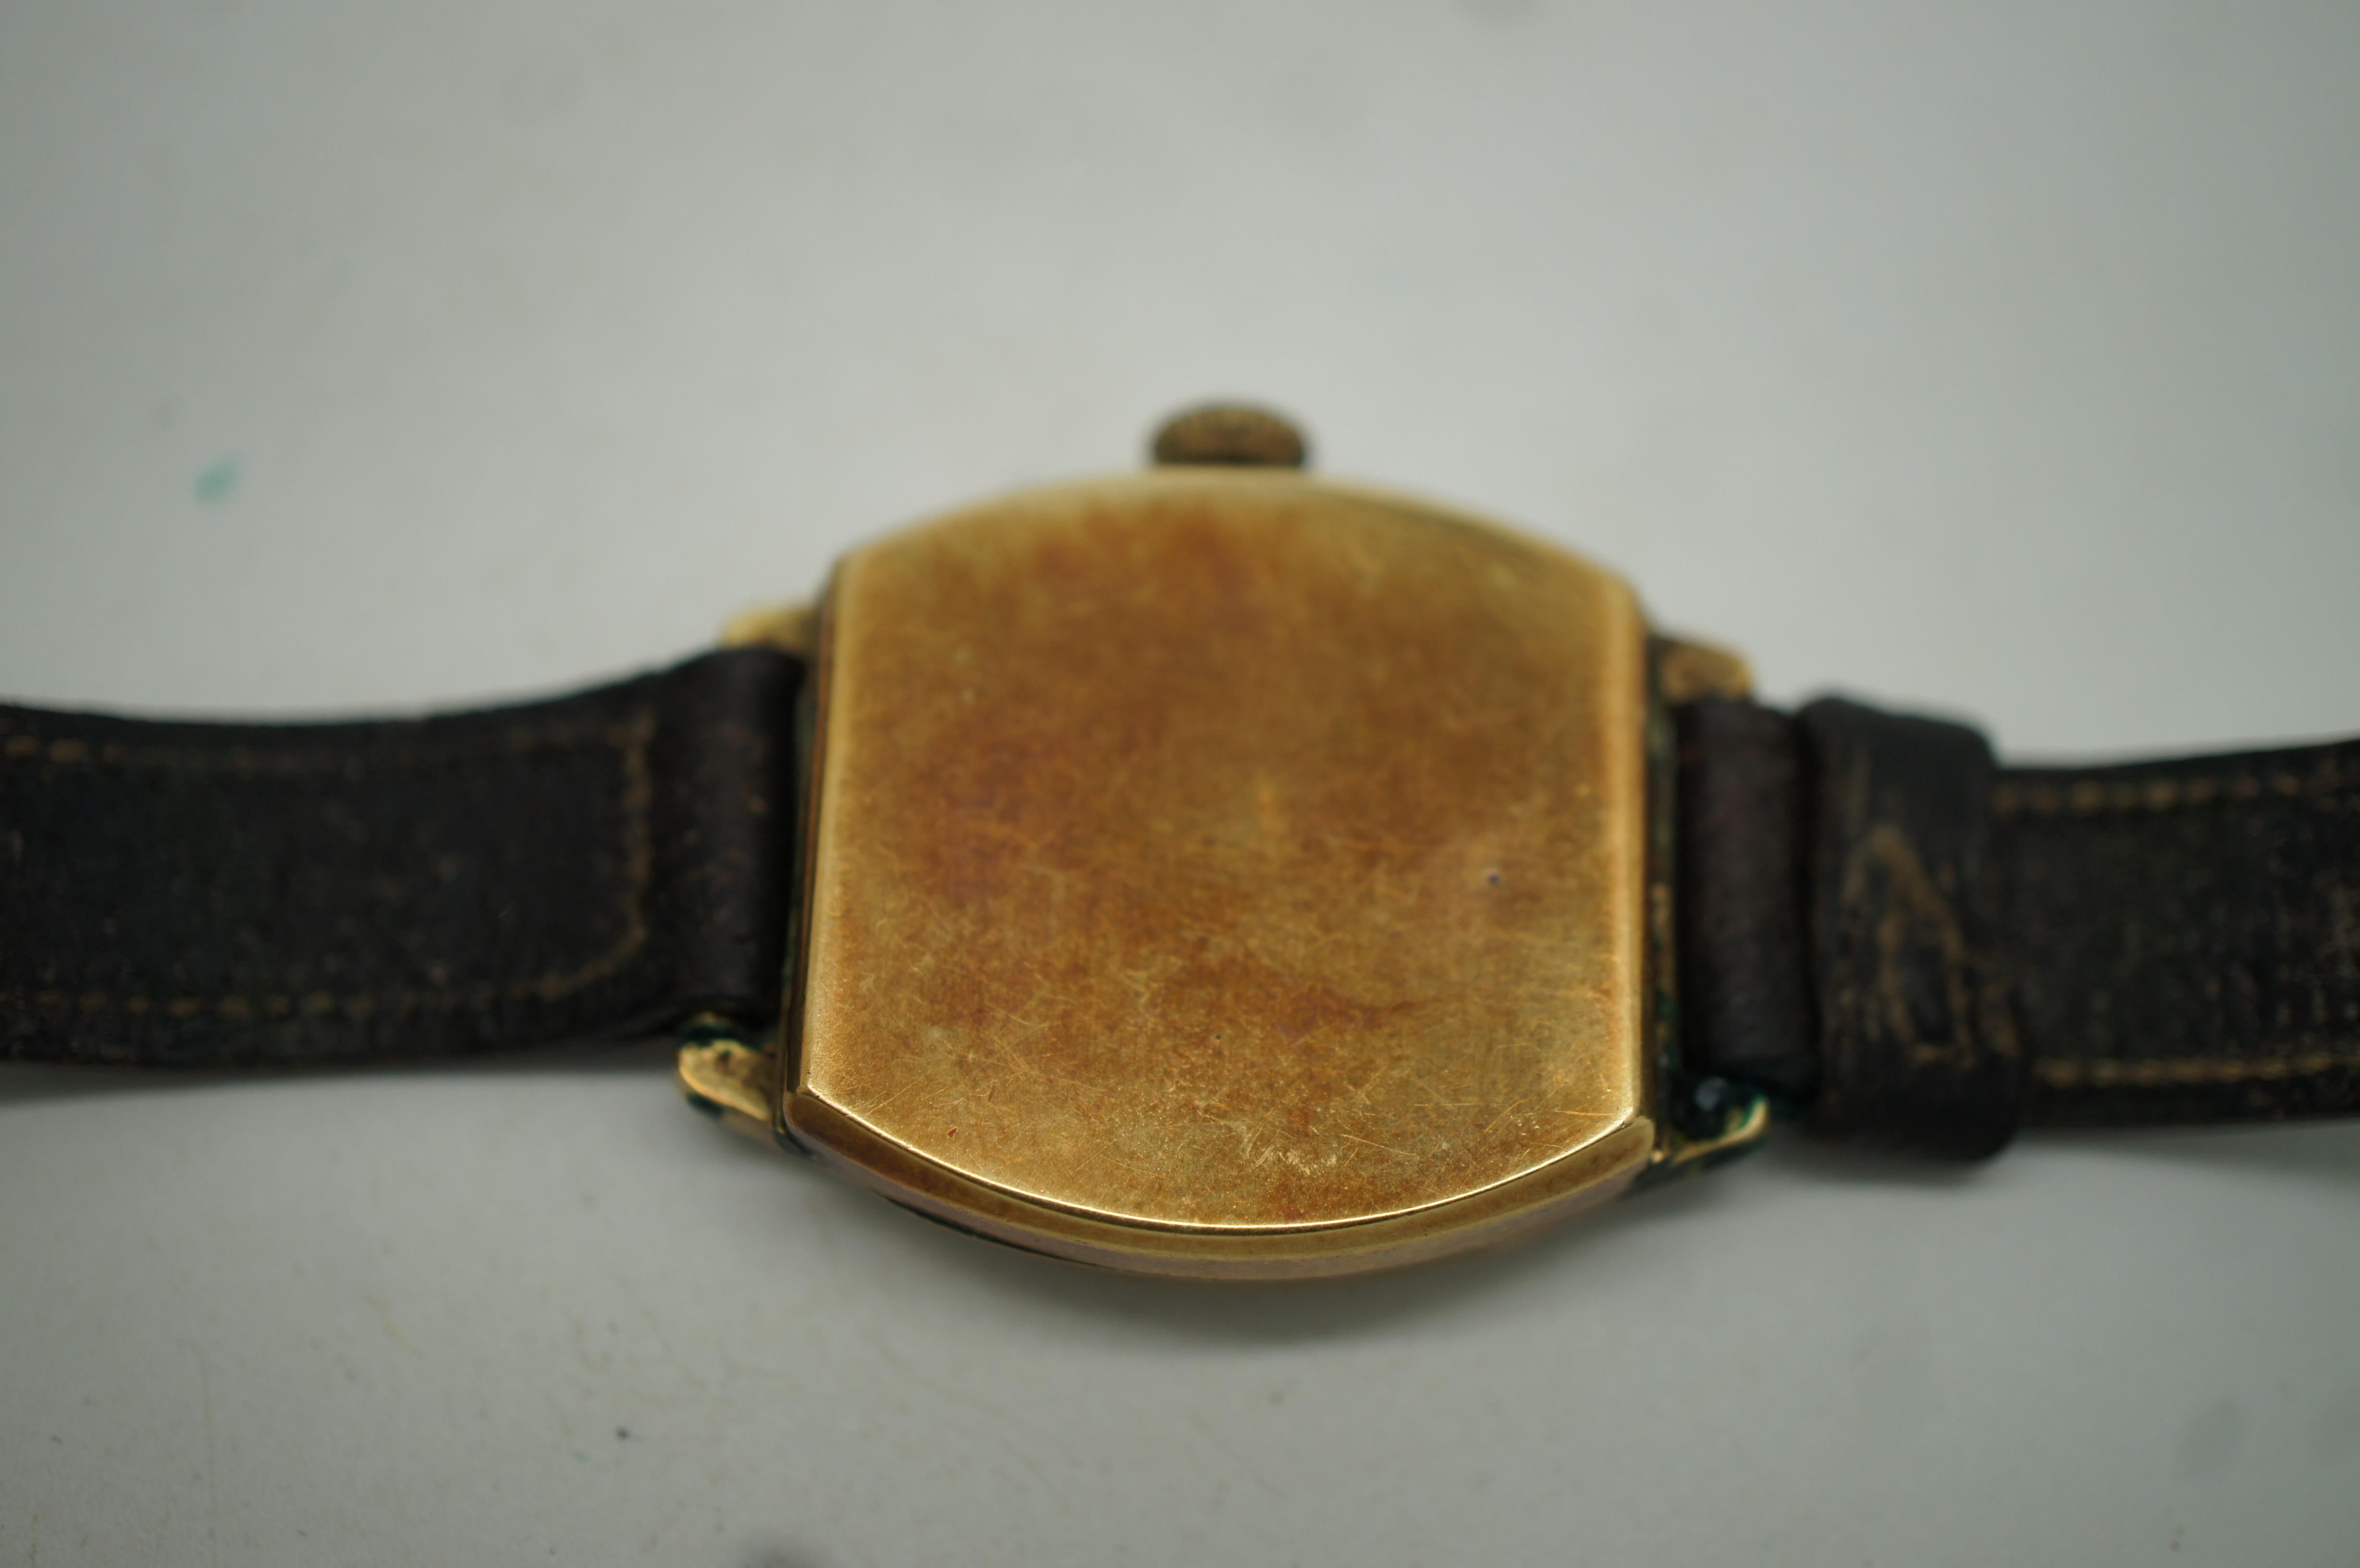 parts of a wrist watch